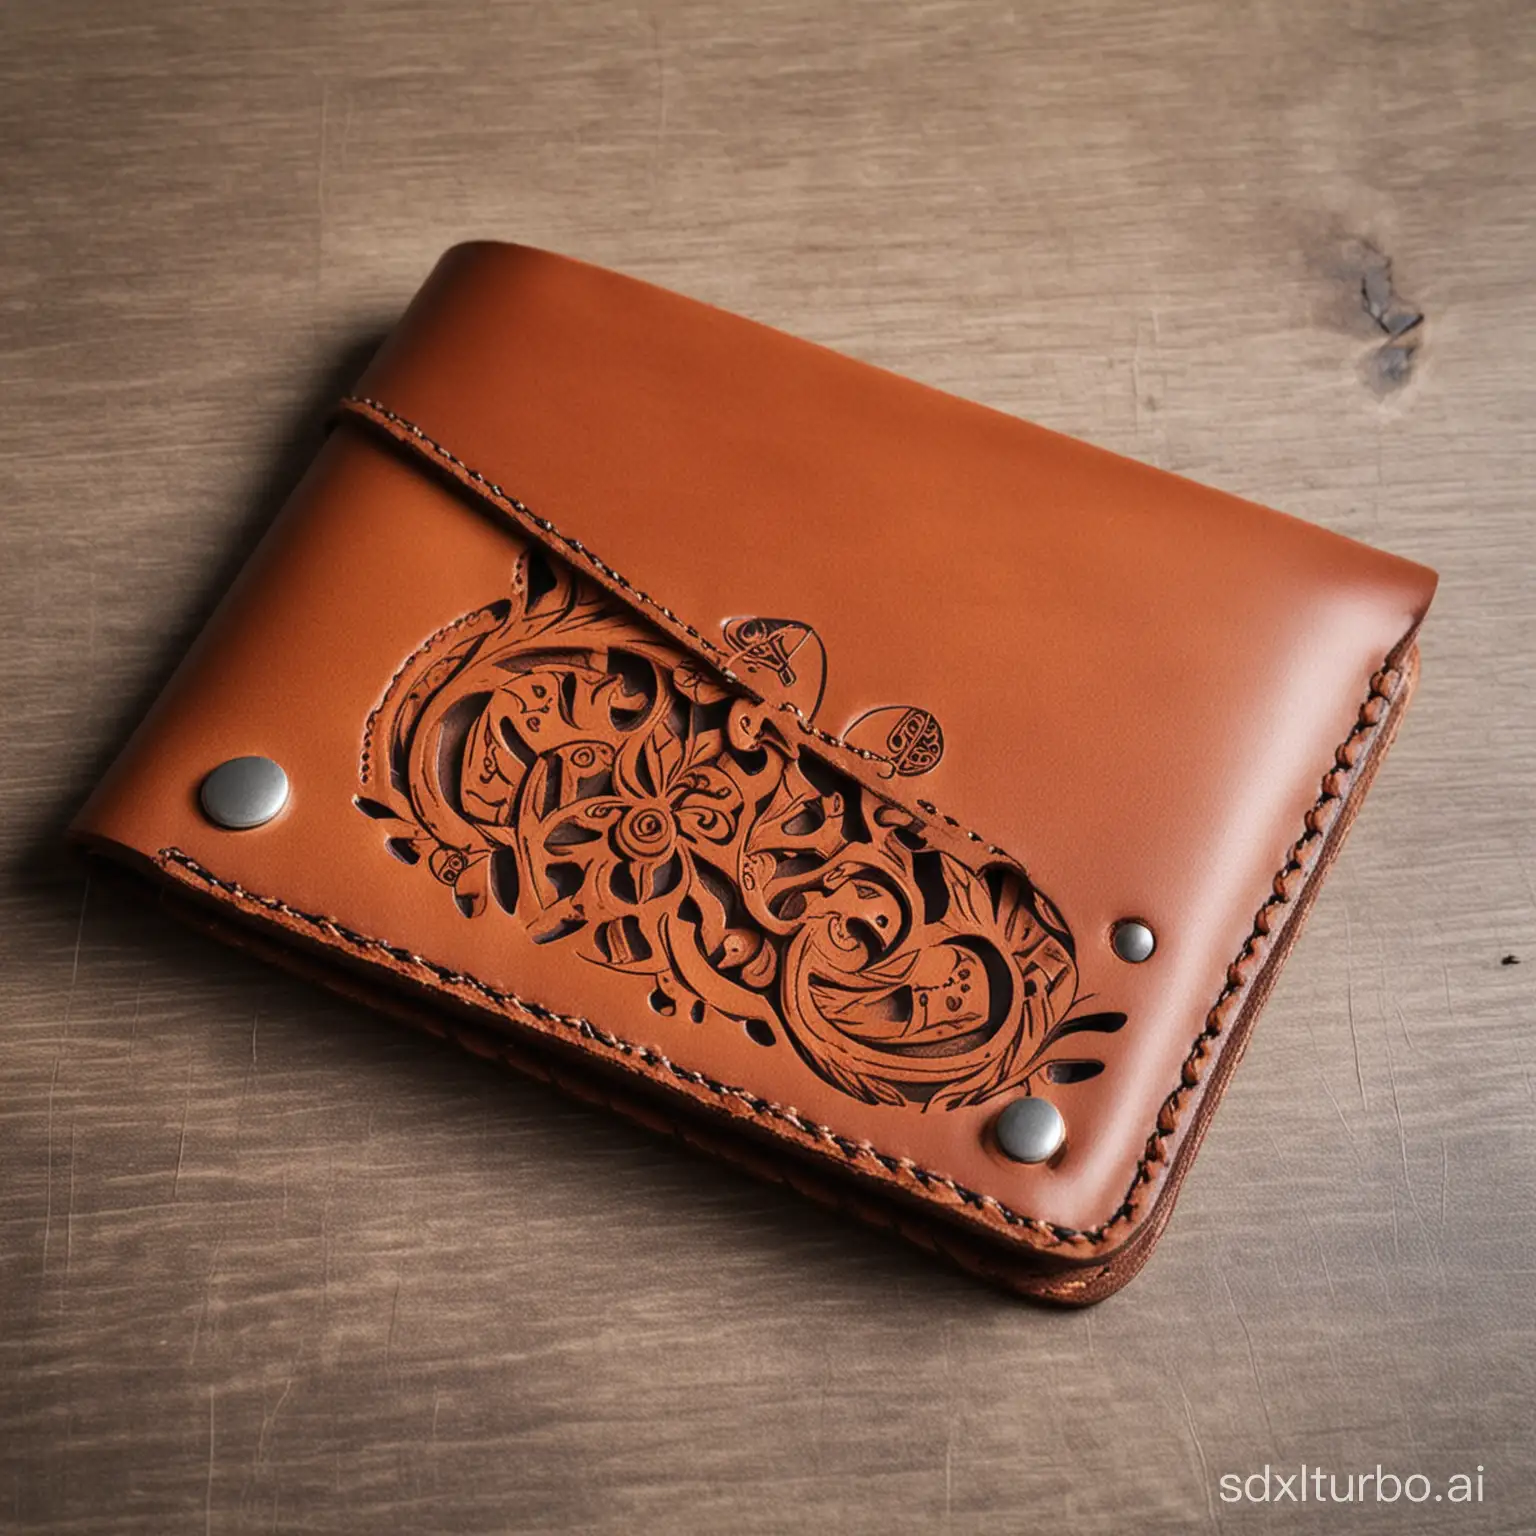 Handcrafted-Leather-Wallet-with-Intricate-Artistic-Design